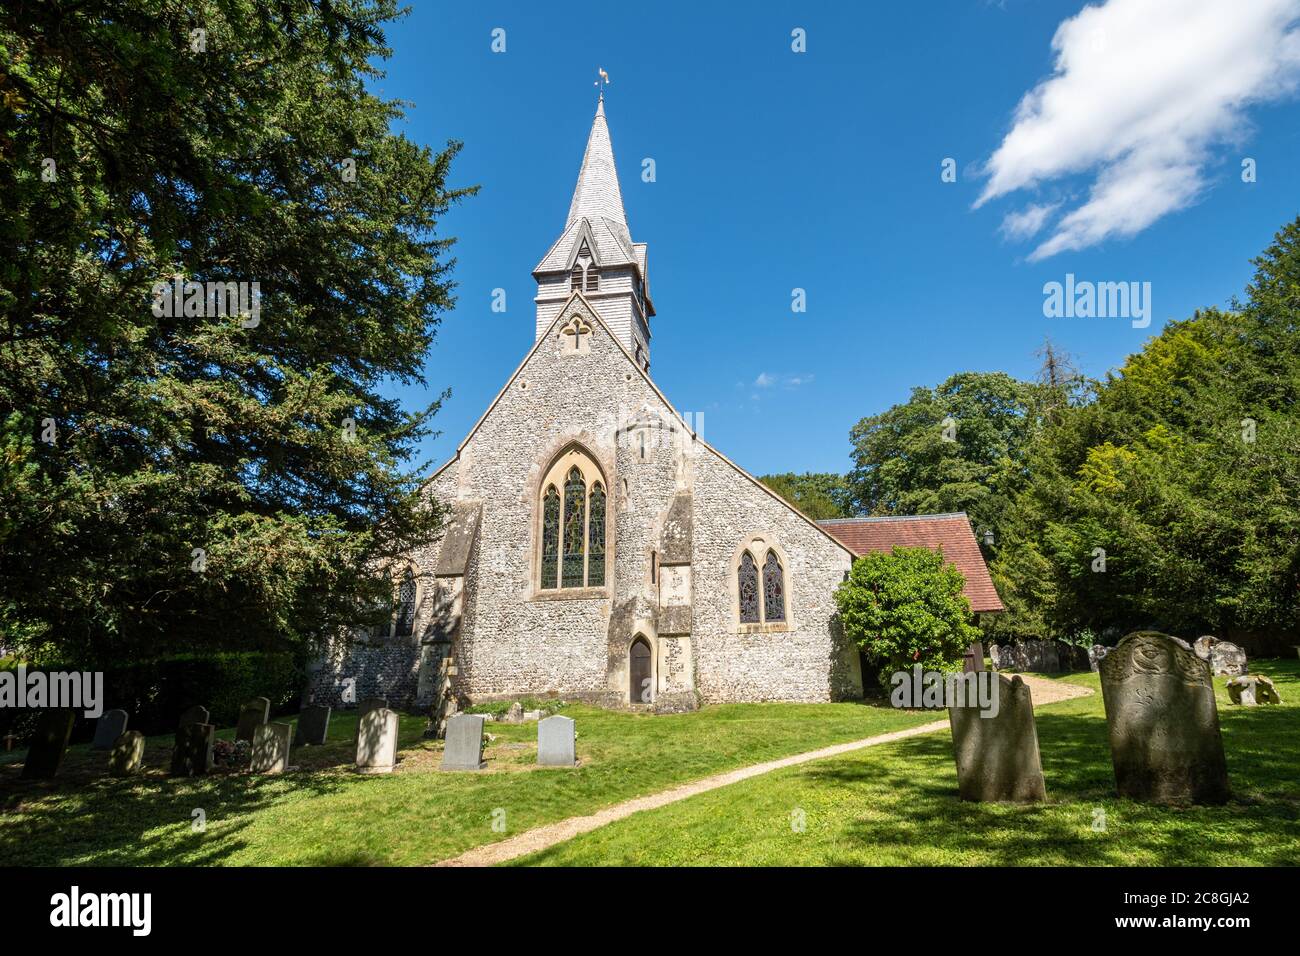 St Peter & Holy Cross Church in the Hampshire village of Wherwell, a Victorian Gothic building built in 1857, UK Stock Photo